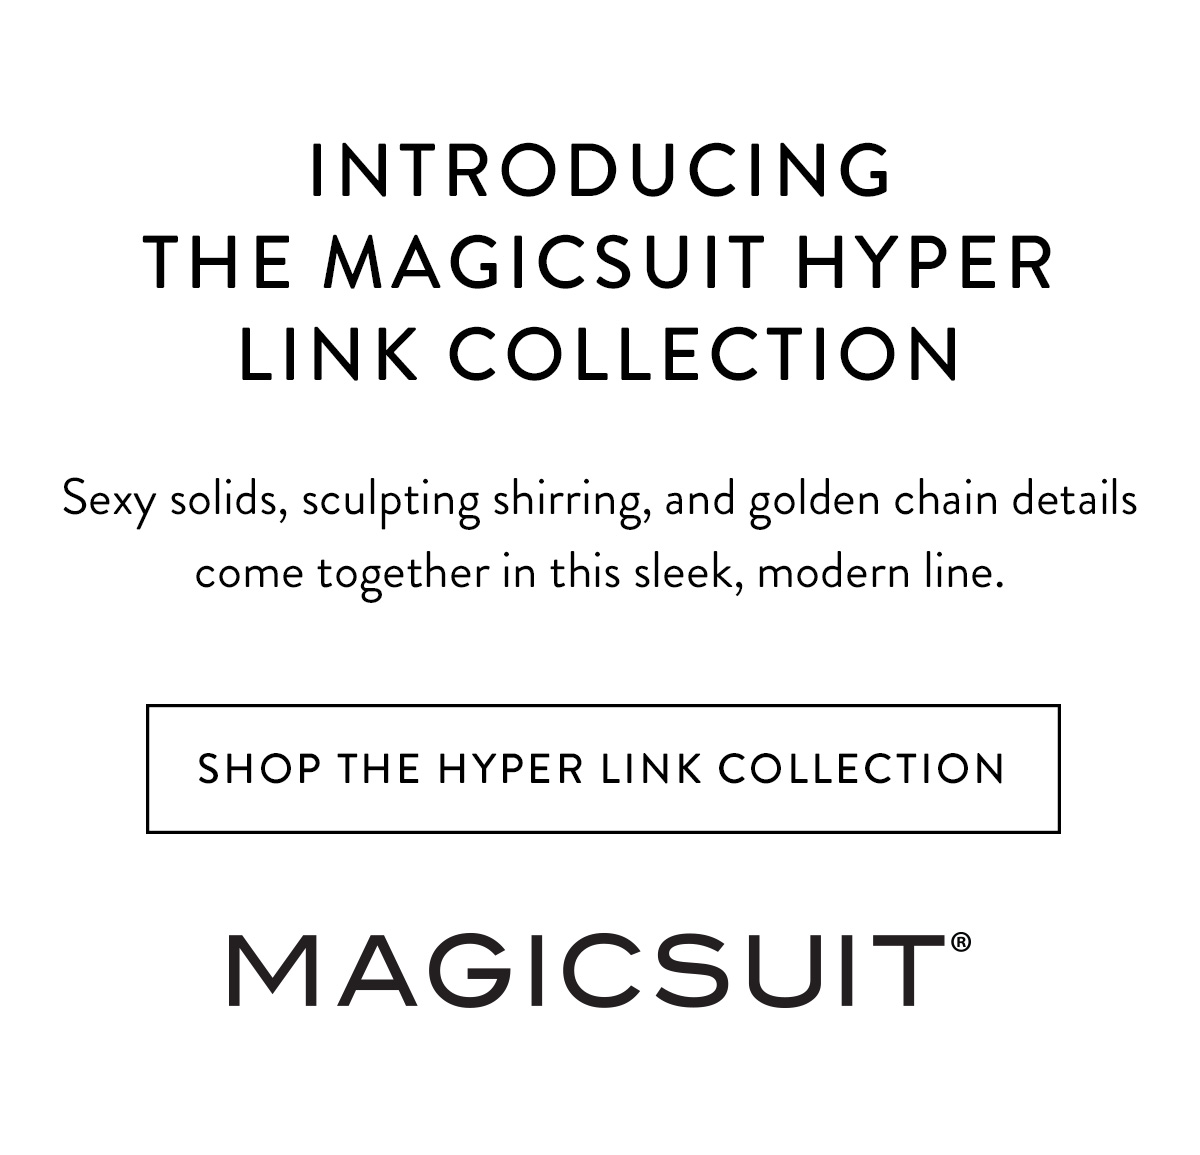 INTRODUCING THE MAGICSUIT HYPER LINK COLLECTION Sexy solids, sculpting shirring, and golden chain details come together in this sleek, modern line. Shop the Hyper Link Collection >